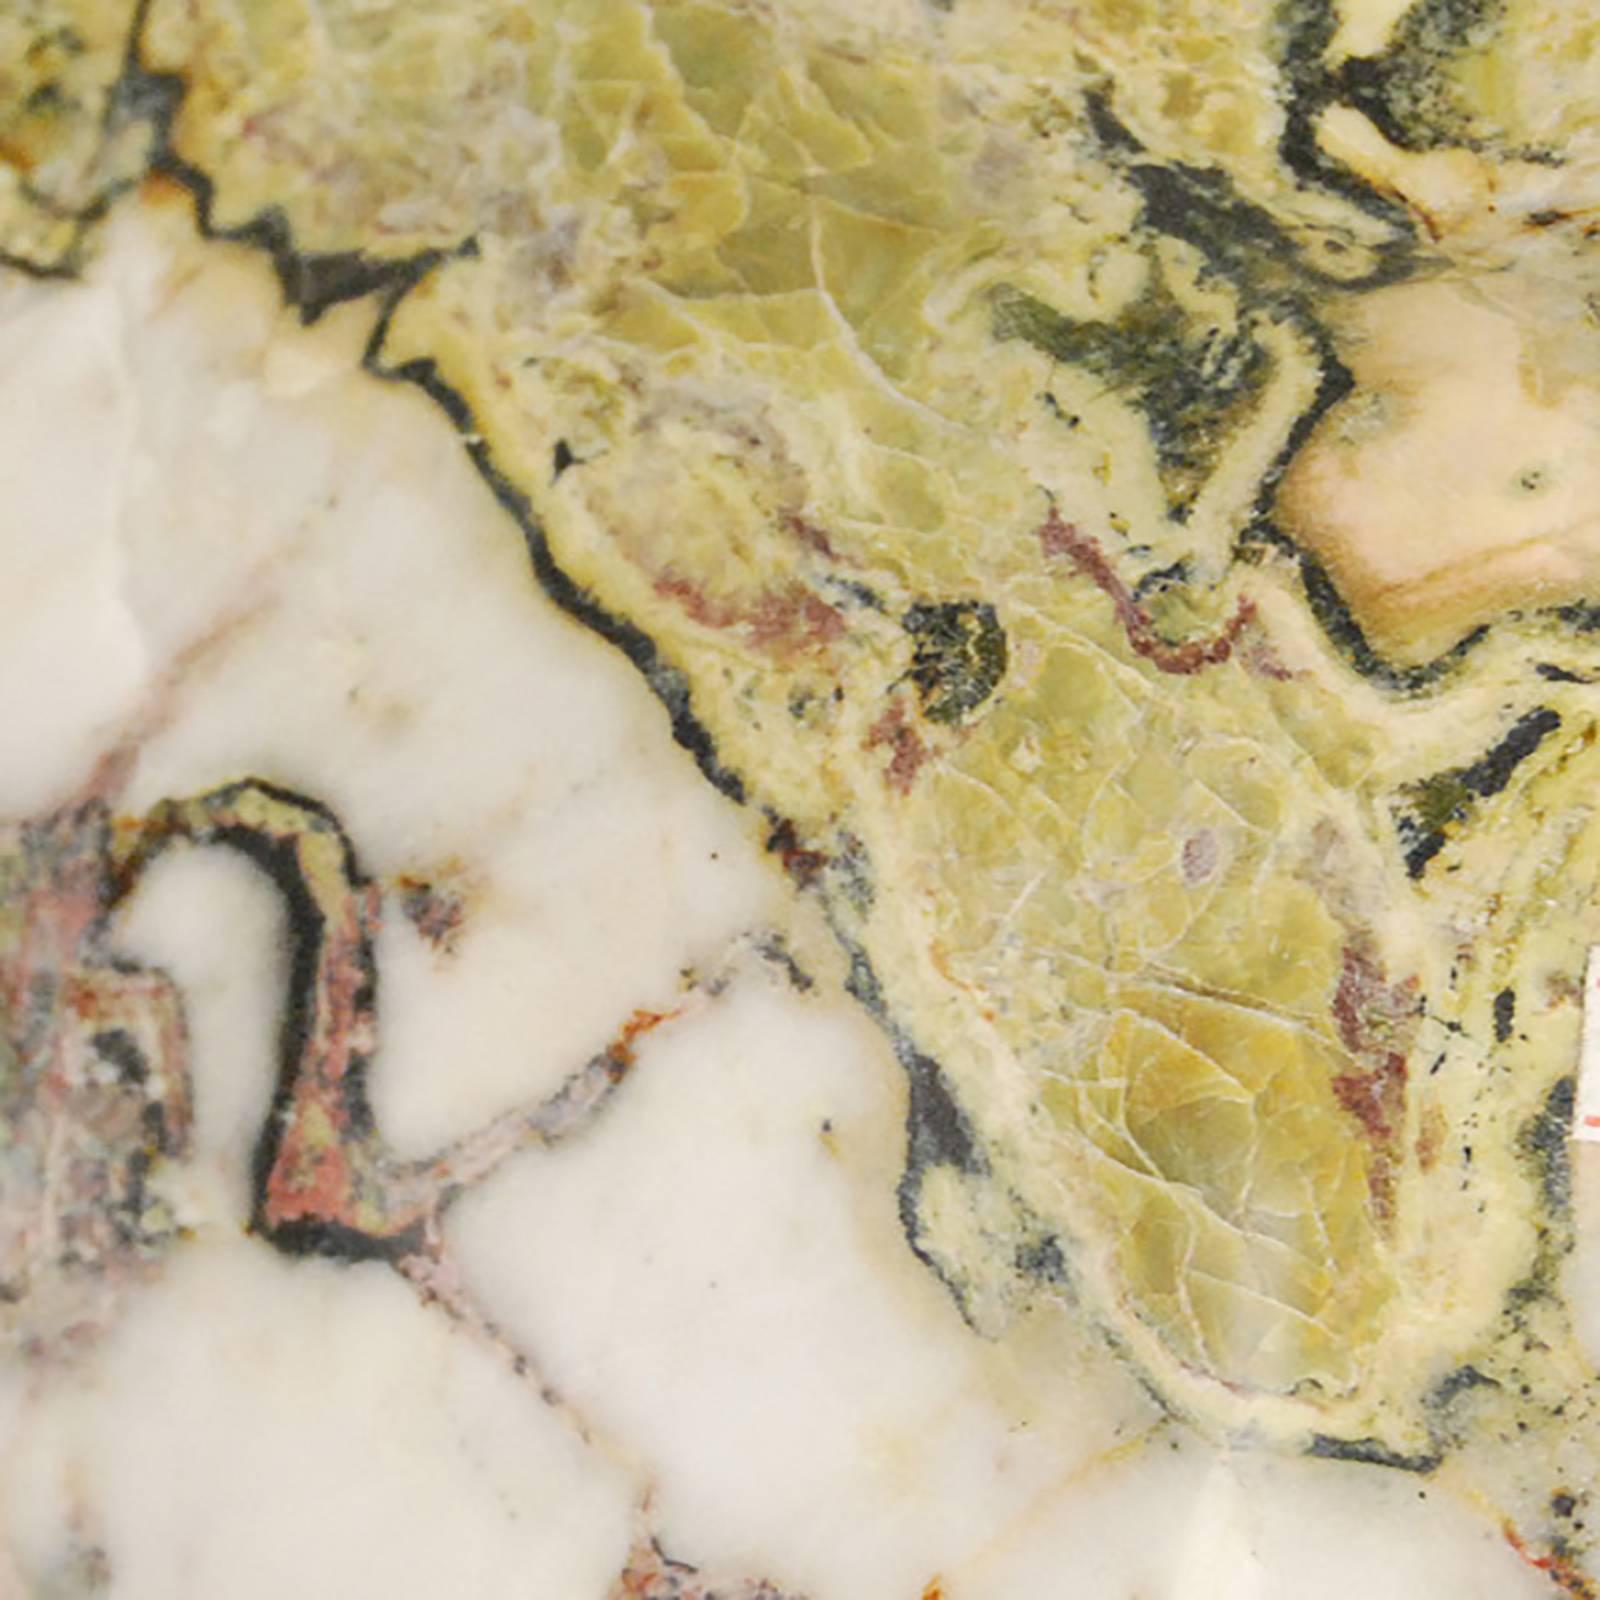 Created hundreds of millions of years ago, this colorful stone foraged in Inner Mongolia has beautiful veining and mottled colors that promote contemplation. A well-chosen stone is a focal point of both a traditional Chinese garden and a scholar's